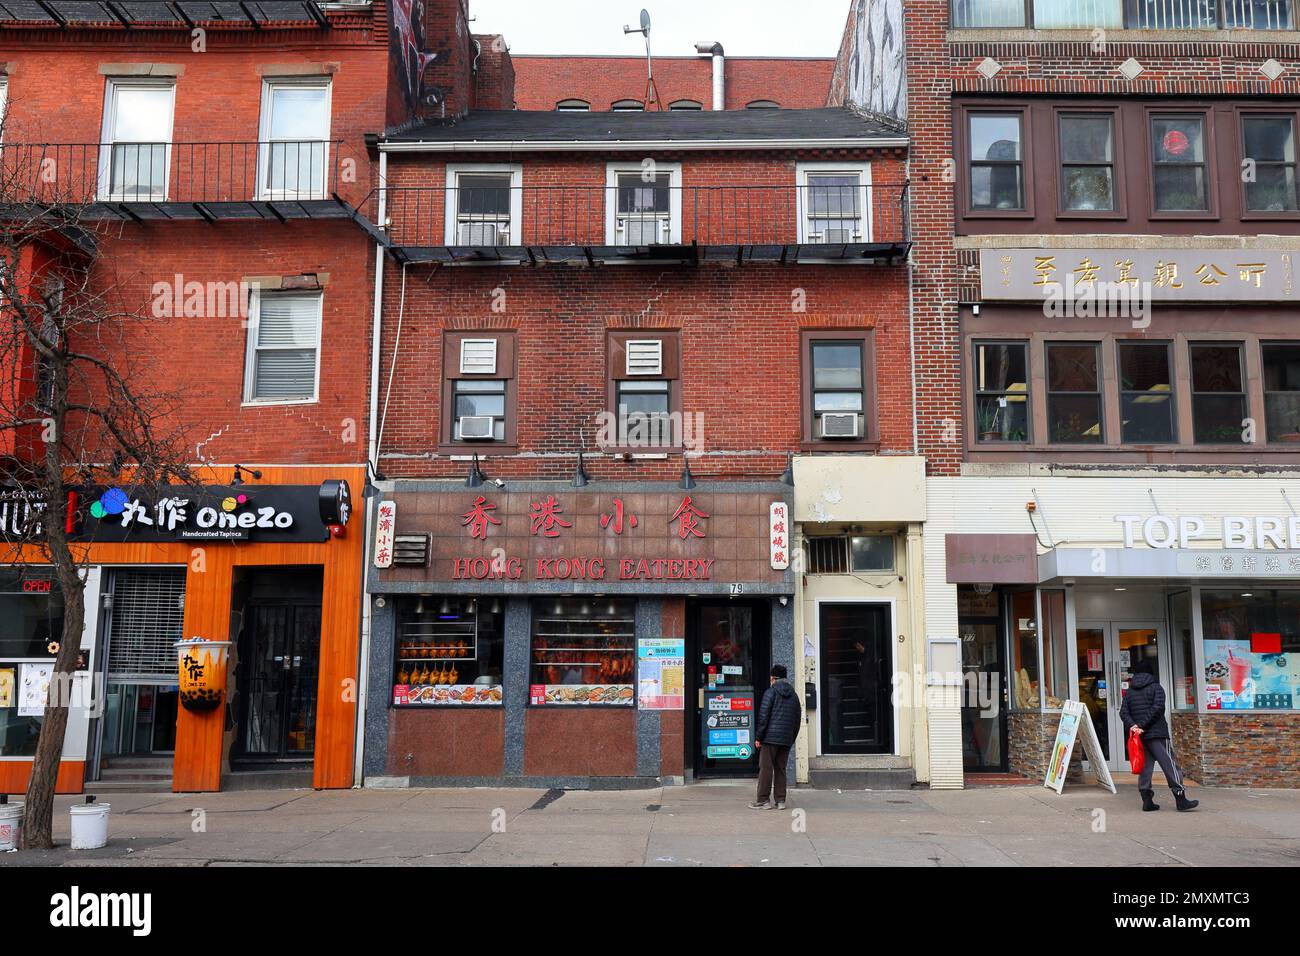 Hong Kong Eatery 香港小食, 79 Harrison Ave, Boston, Massachusetts. exterior storefront of a Cantonese style roast meats Chinese restaurant in Chinatown. Stock Photo